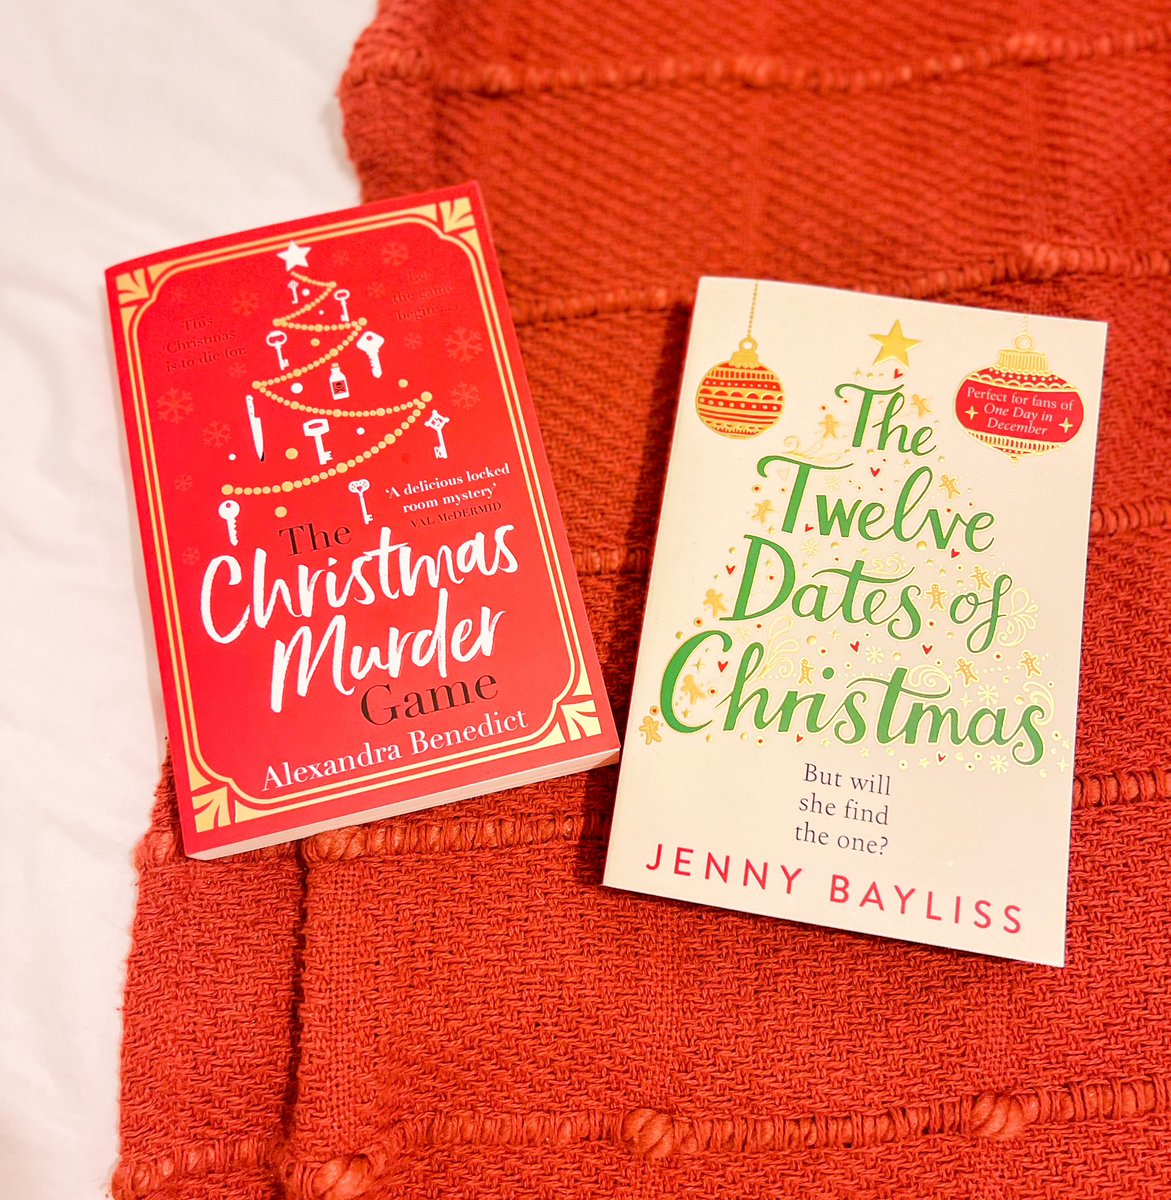 Looking for a Christmas book? Would recommend The Christmas Murder Game by @ak_benedict @ZaffreBooks and The Twelve Dates of Christmas by @BaylissJenni @panmacmillan Also loved The Christmas Bookshop by @jennycolgan @spherepublisher #booktwt #christmasbooks #bookreviews